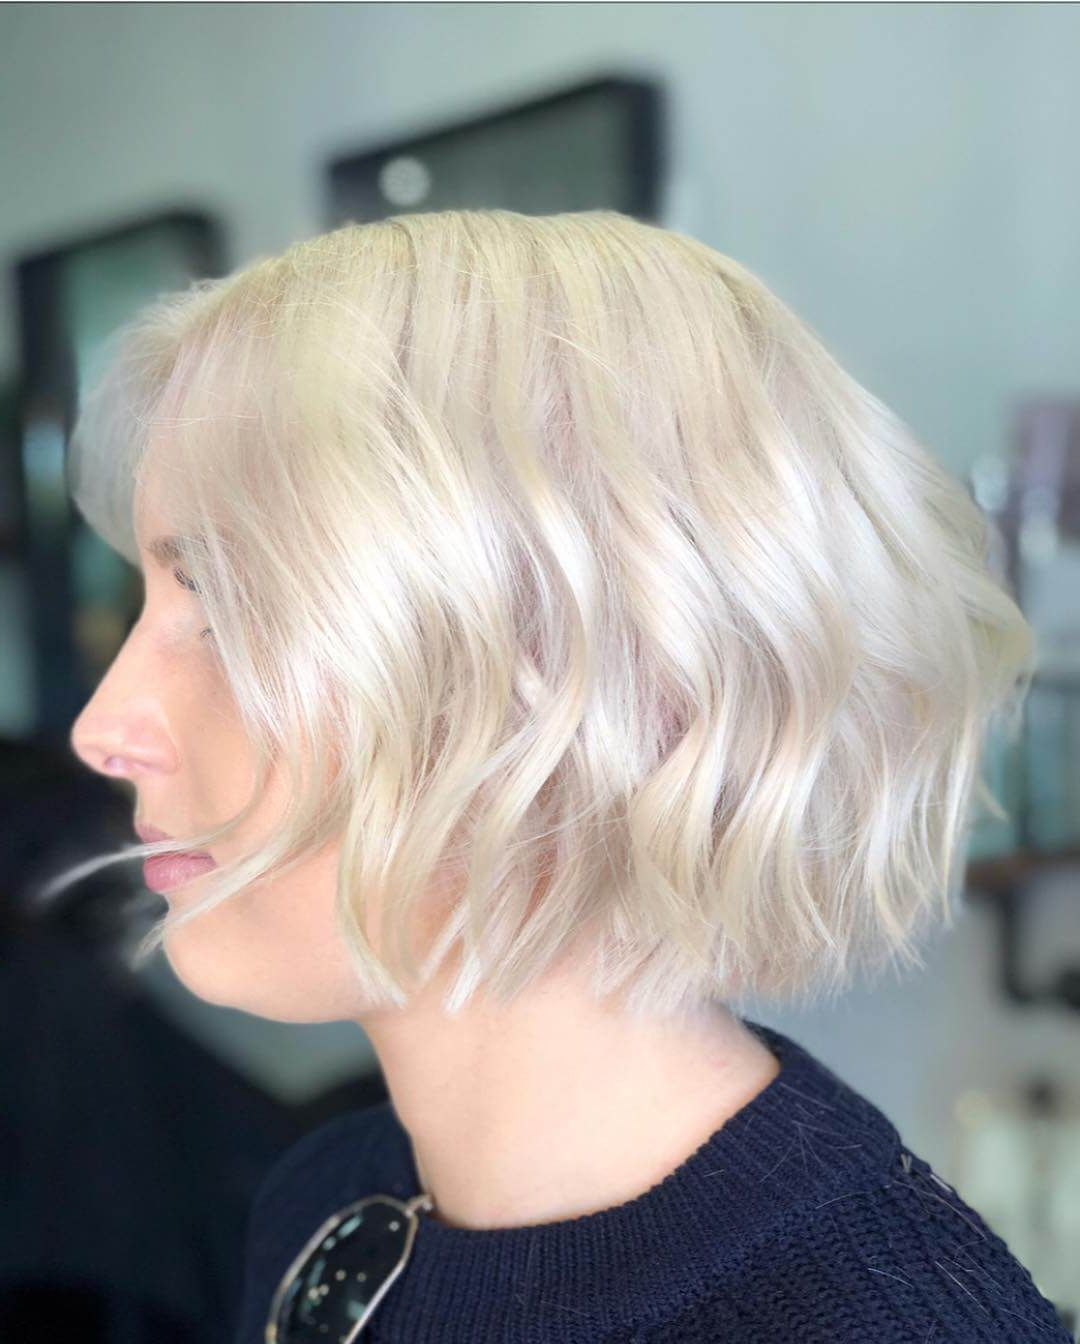 Widely Used Fun Choppy Bob Hairstyles With A Deep Side Part Throughout 30 Choppy Bob Hairstyles – Try Something New & Trendy! (View 11 of 20)